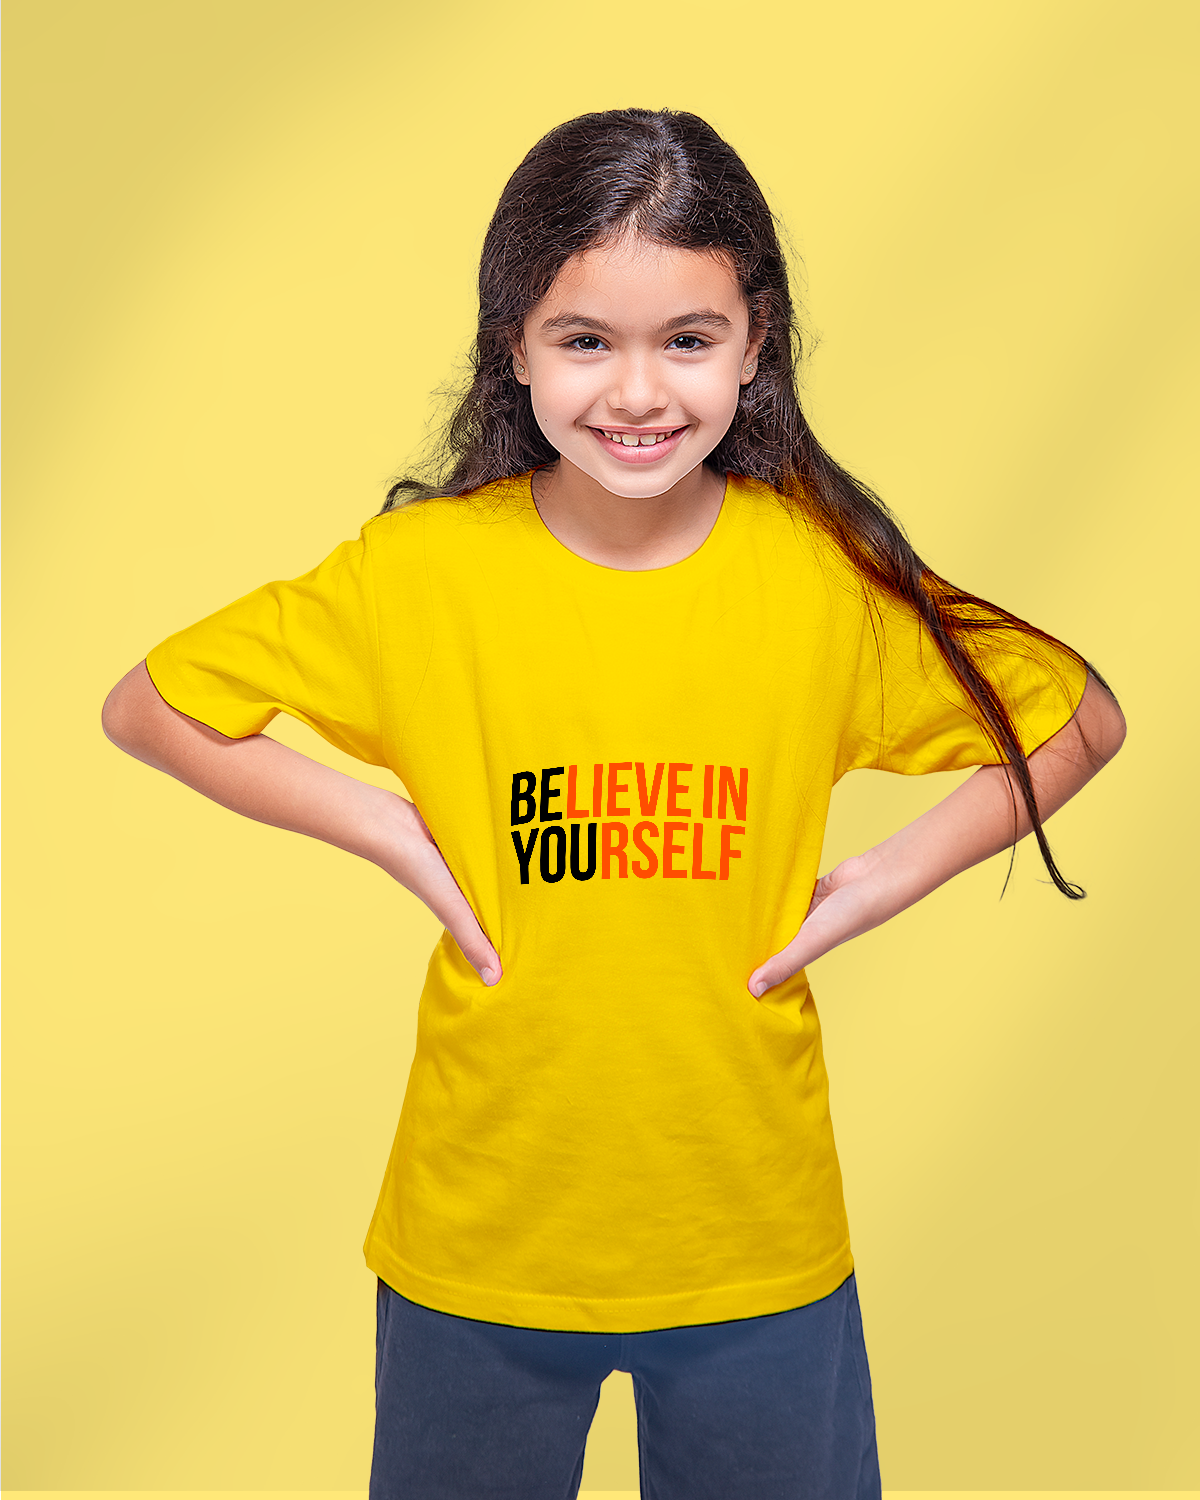 T-shirt For Girls (Believe in Yourself)